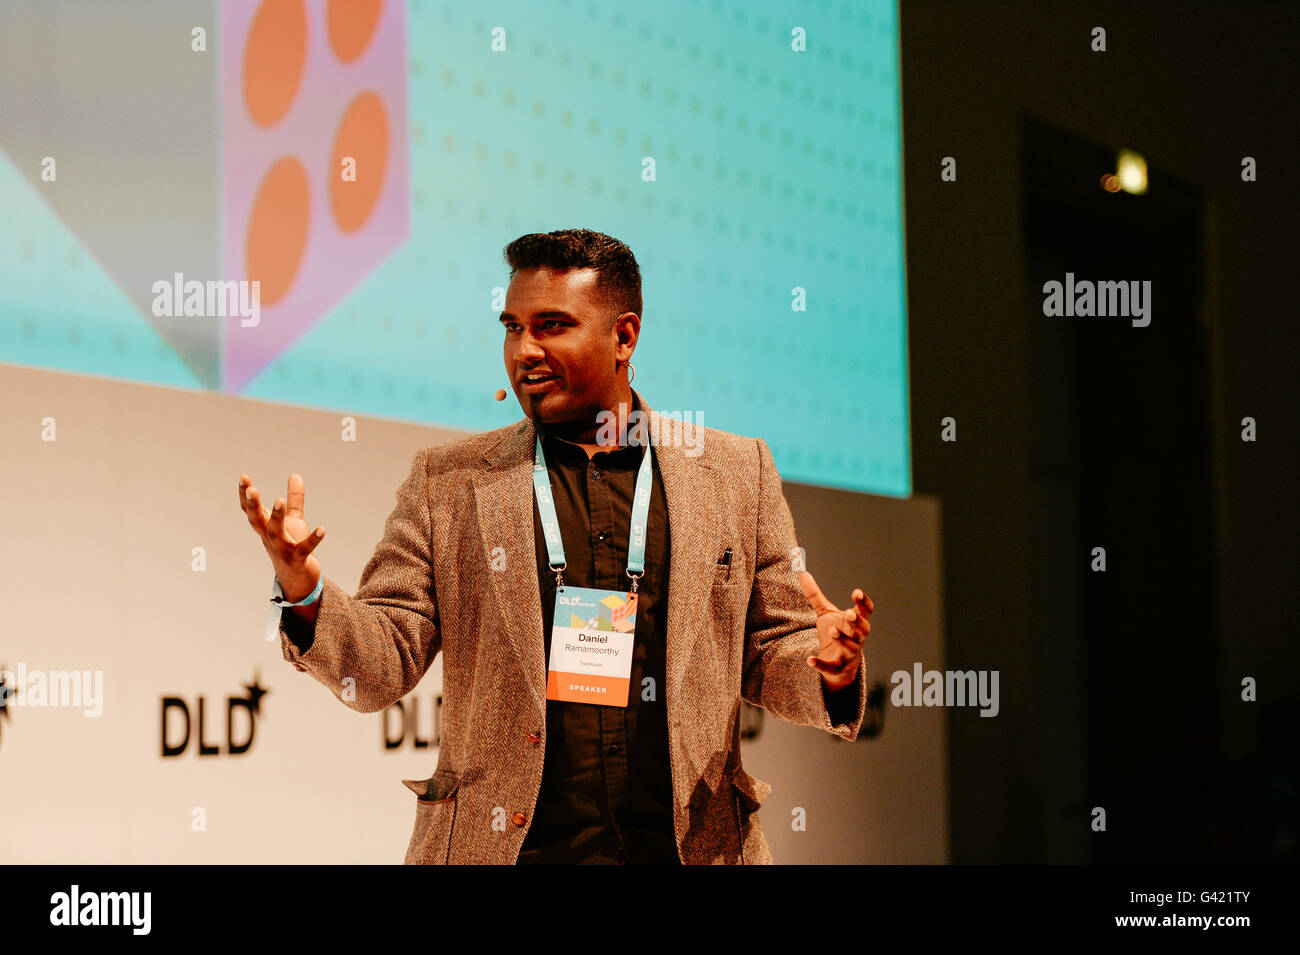 MUNICH/GERMANY - JUNE 16: Entrepreneur Daniel Ramamoorthy gestures speaking onstage during the DLDsummer Conference 2016 at Haus der Kunst, Munich. DLDsummer takes place June 16-17, 2016 and focuses on the changing through digitalization in the areas of life, work and business (Photo: picture alliance for DLD/Jan Haas) | usage worldwide Stock Photo